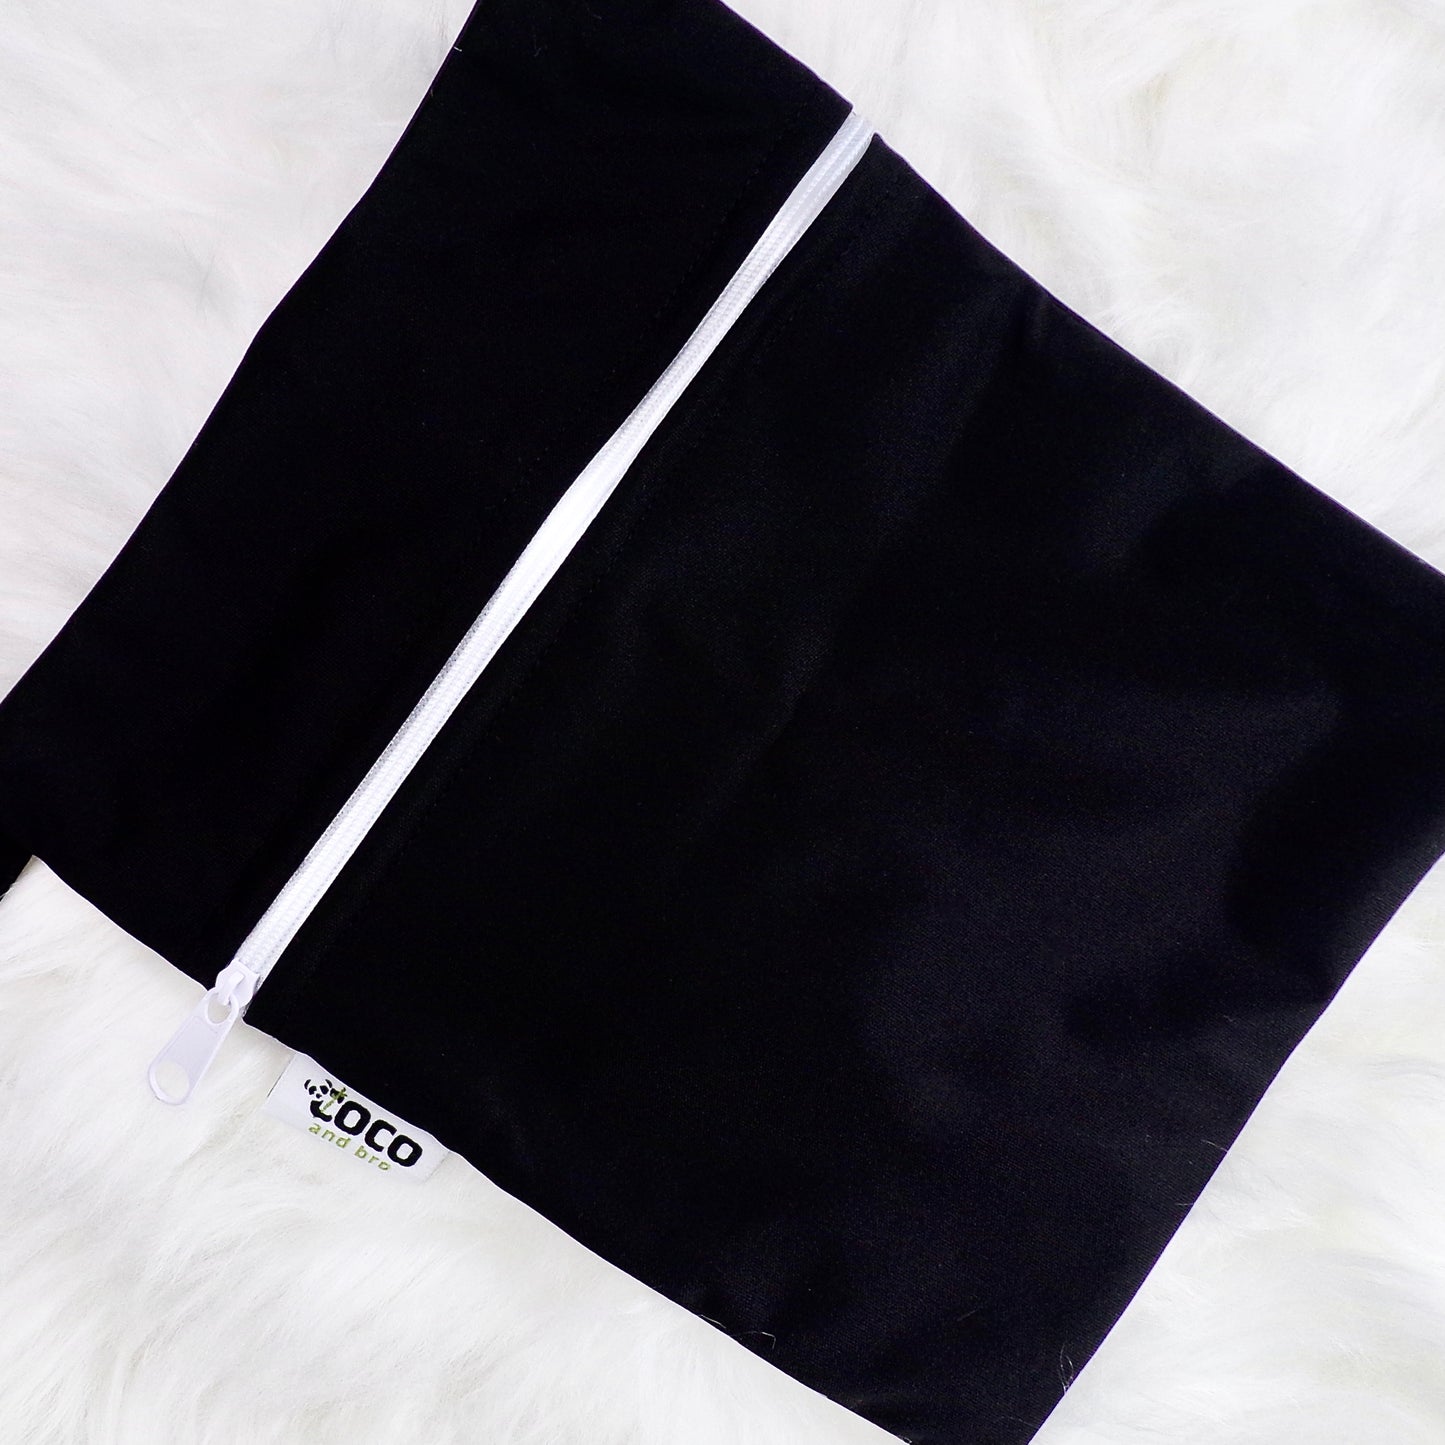 This image shows a waterproof bag in black, with a zip closure.